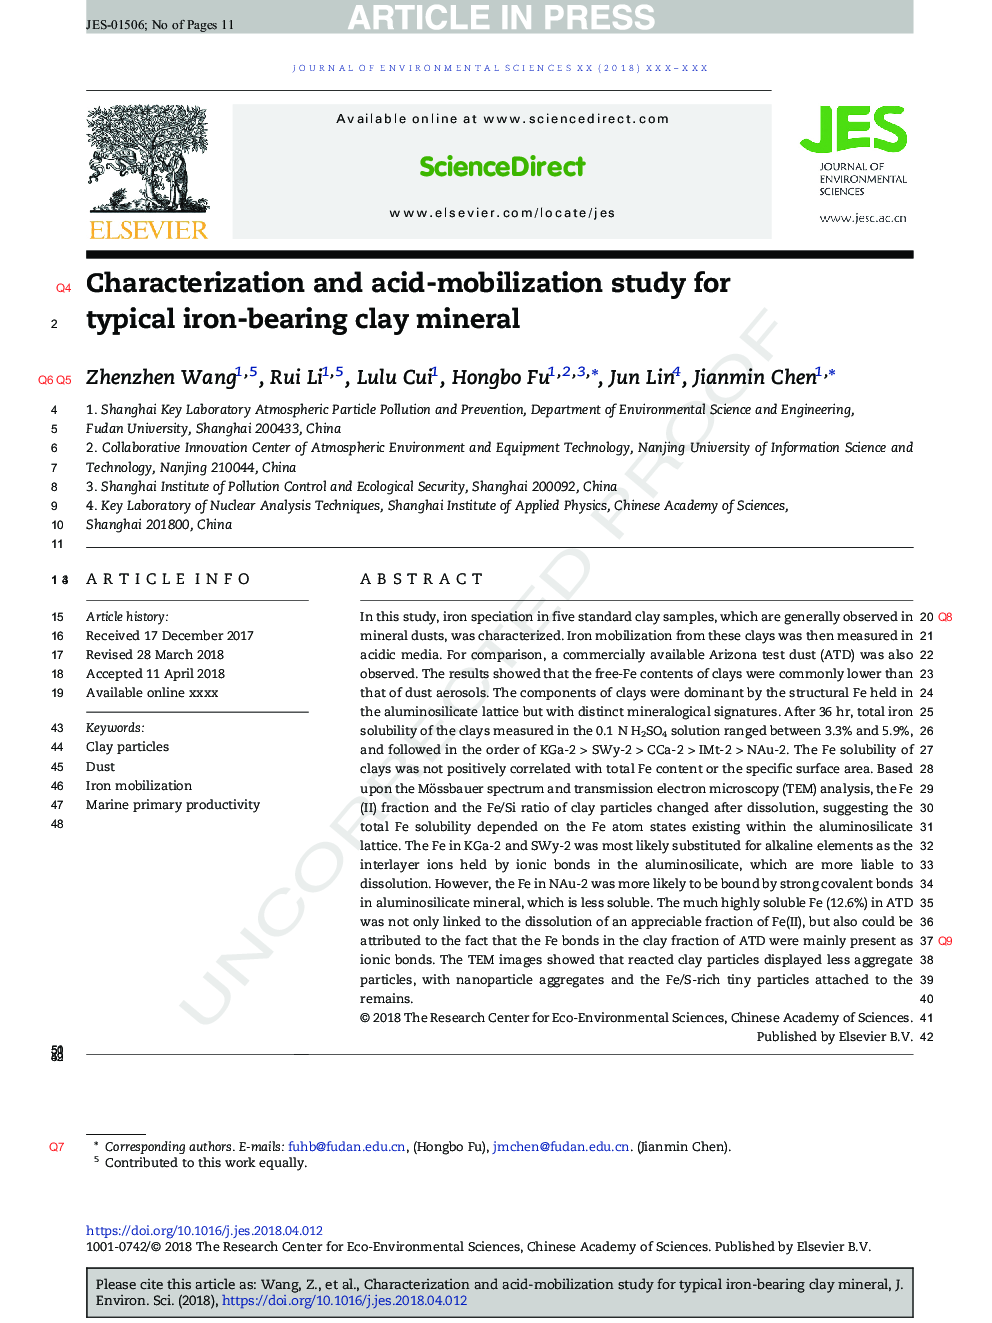 Characterization and acid-mobilization study for typical iron-bearing clay mineral